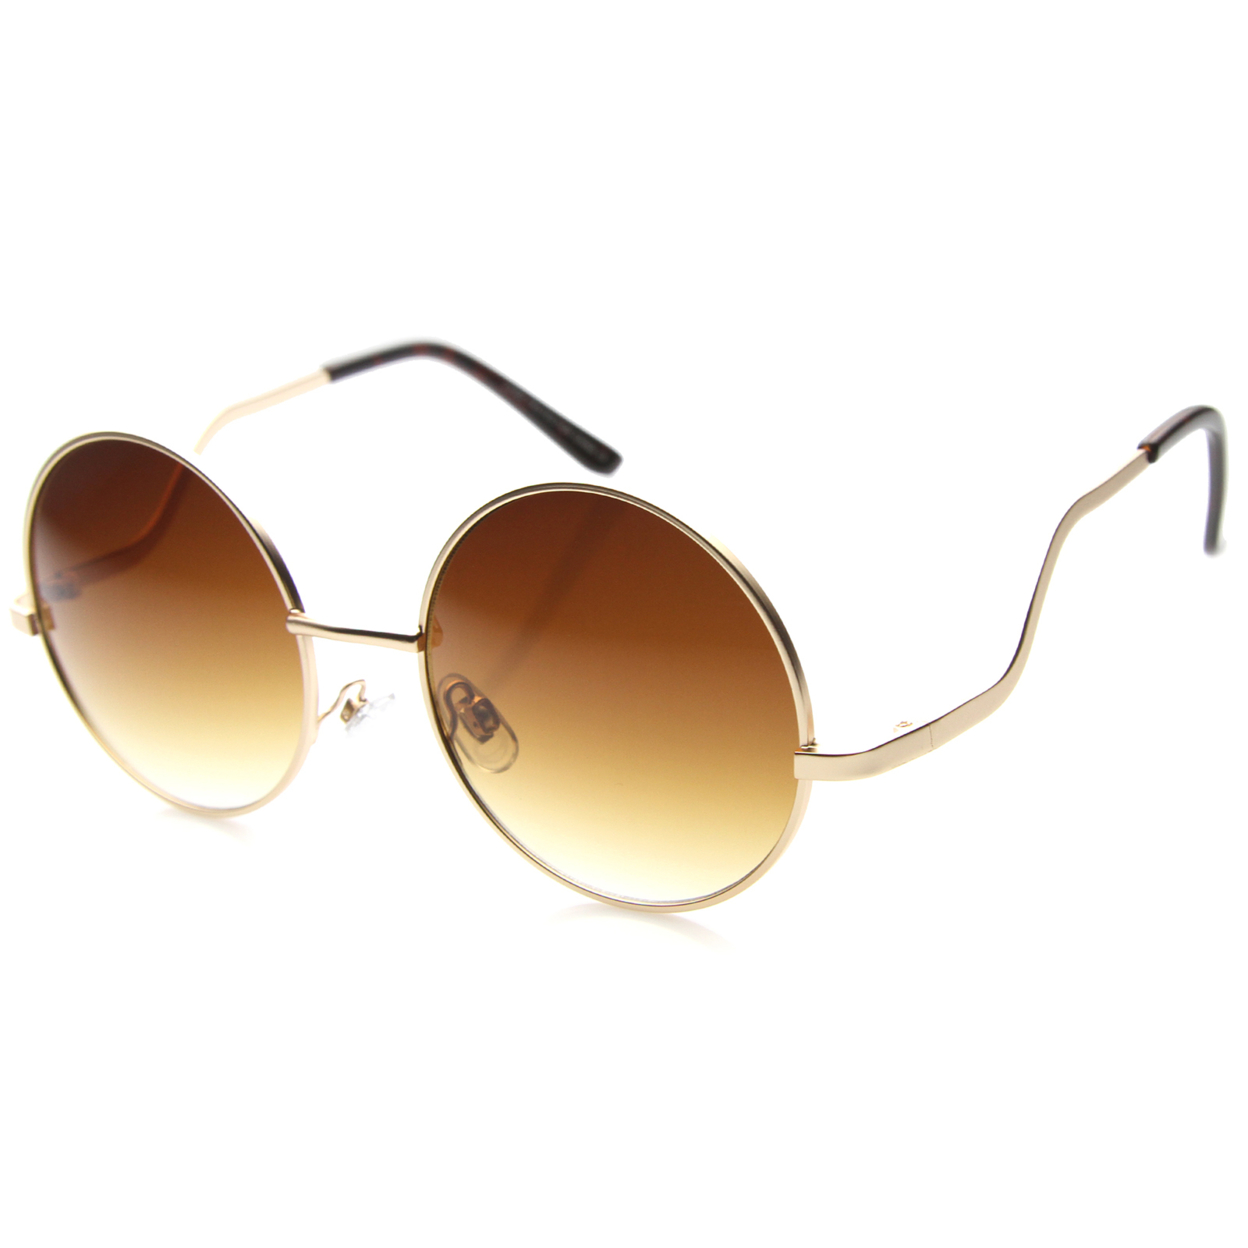 Womens Metal Round Sunglasses With UV400 Protected Gradient Lens 9979 - Gold / Amber